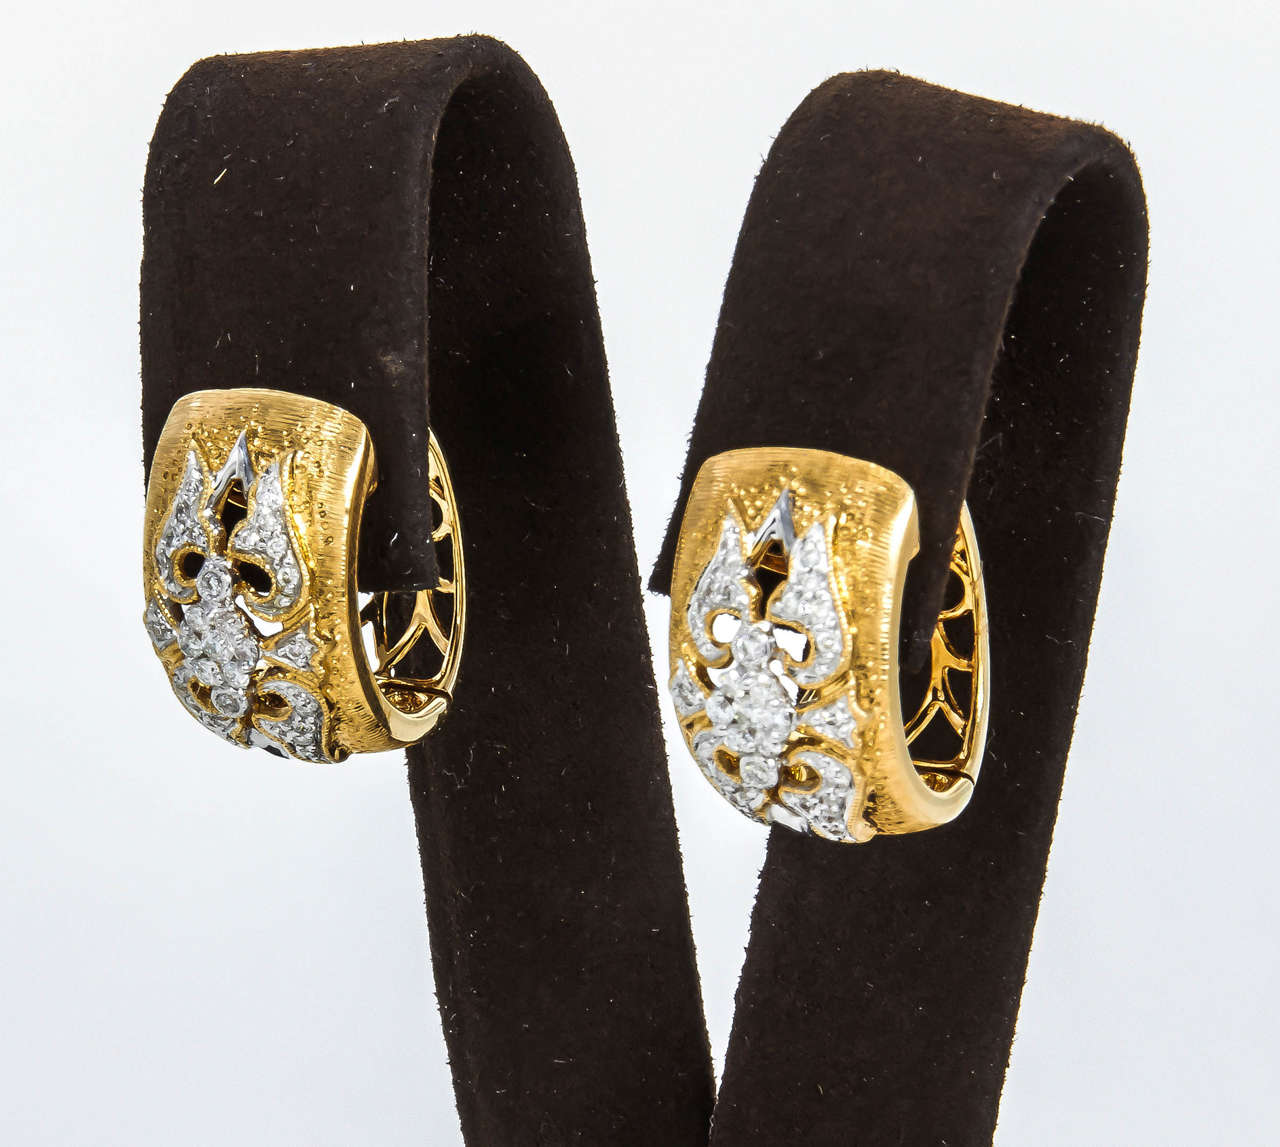 Inspired by the great Italian jewelry houses, this earring is one of a kind.

.55 carats of white diamonds set in 18k yellow and white gold. 
These earrings have exquisite detail and design. They are timeless.